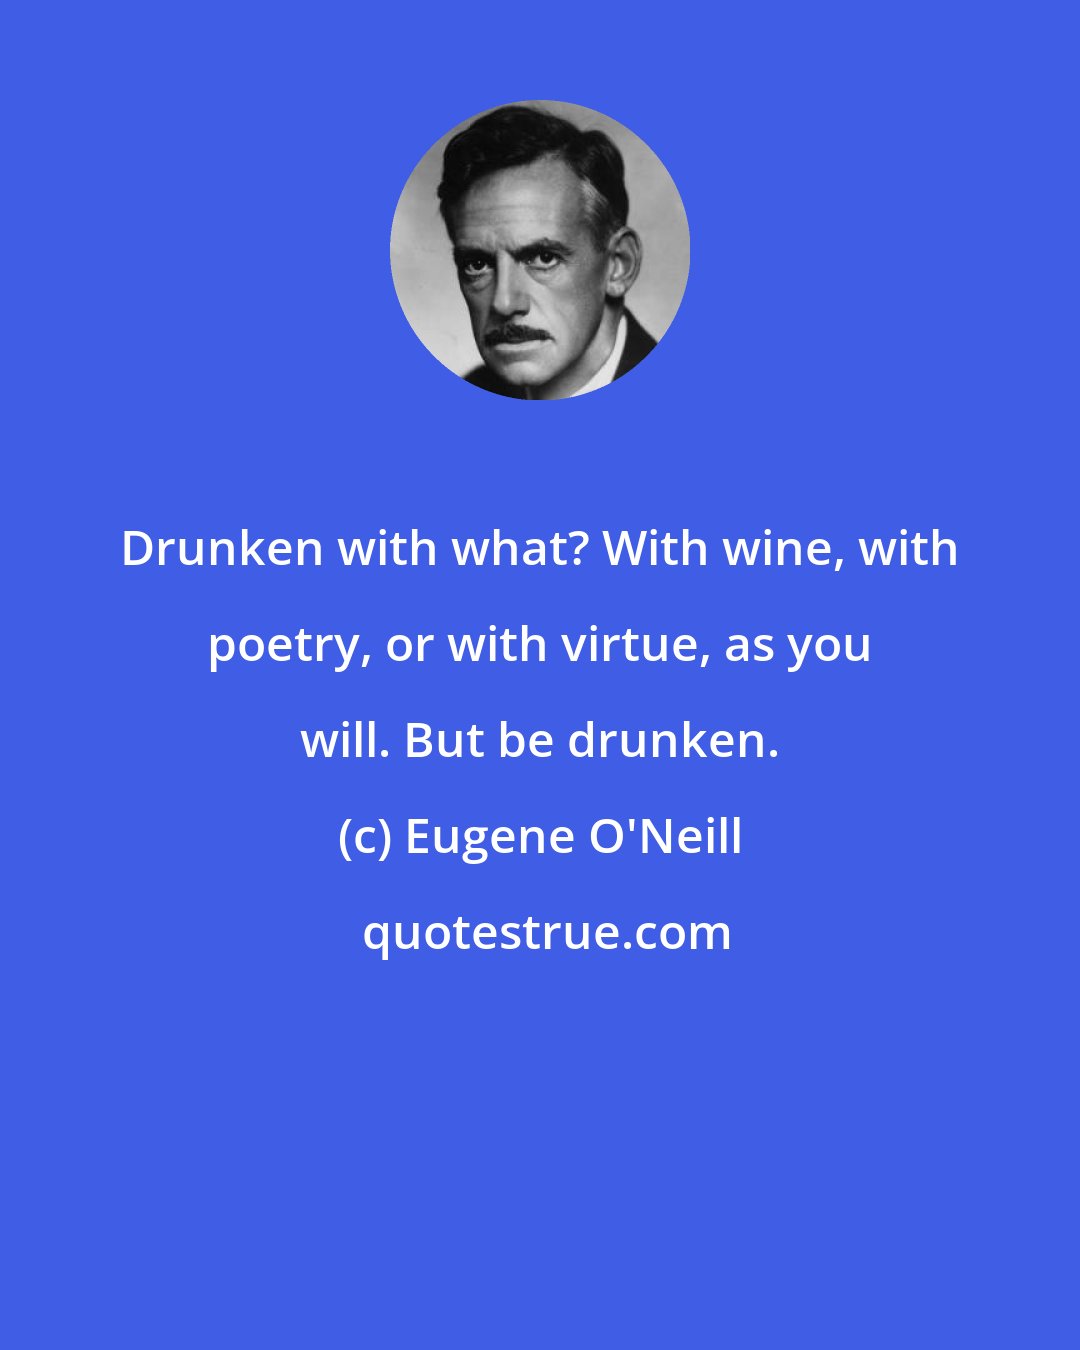 Eugene O'Neill: Drunken with what? With wine, with poetry, or with virtue, as you will. But be drunken.